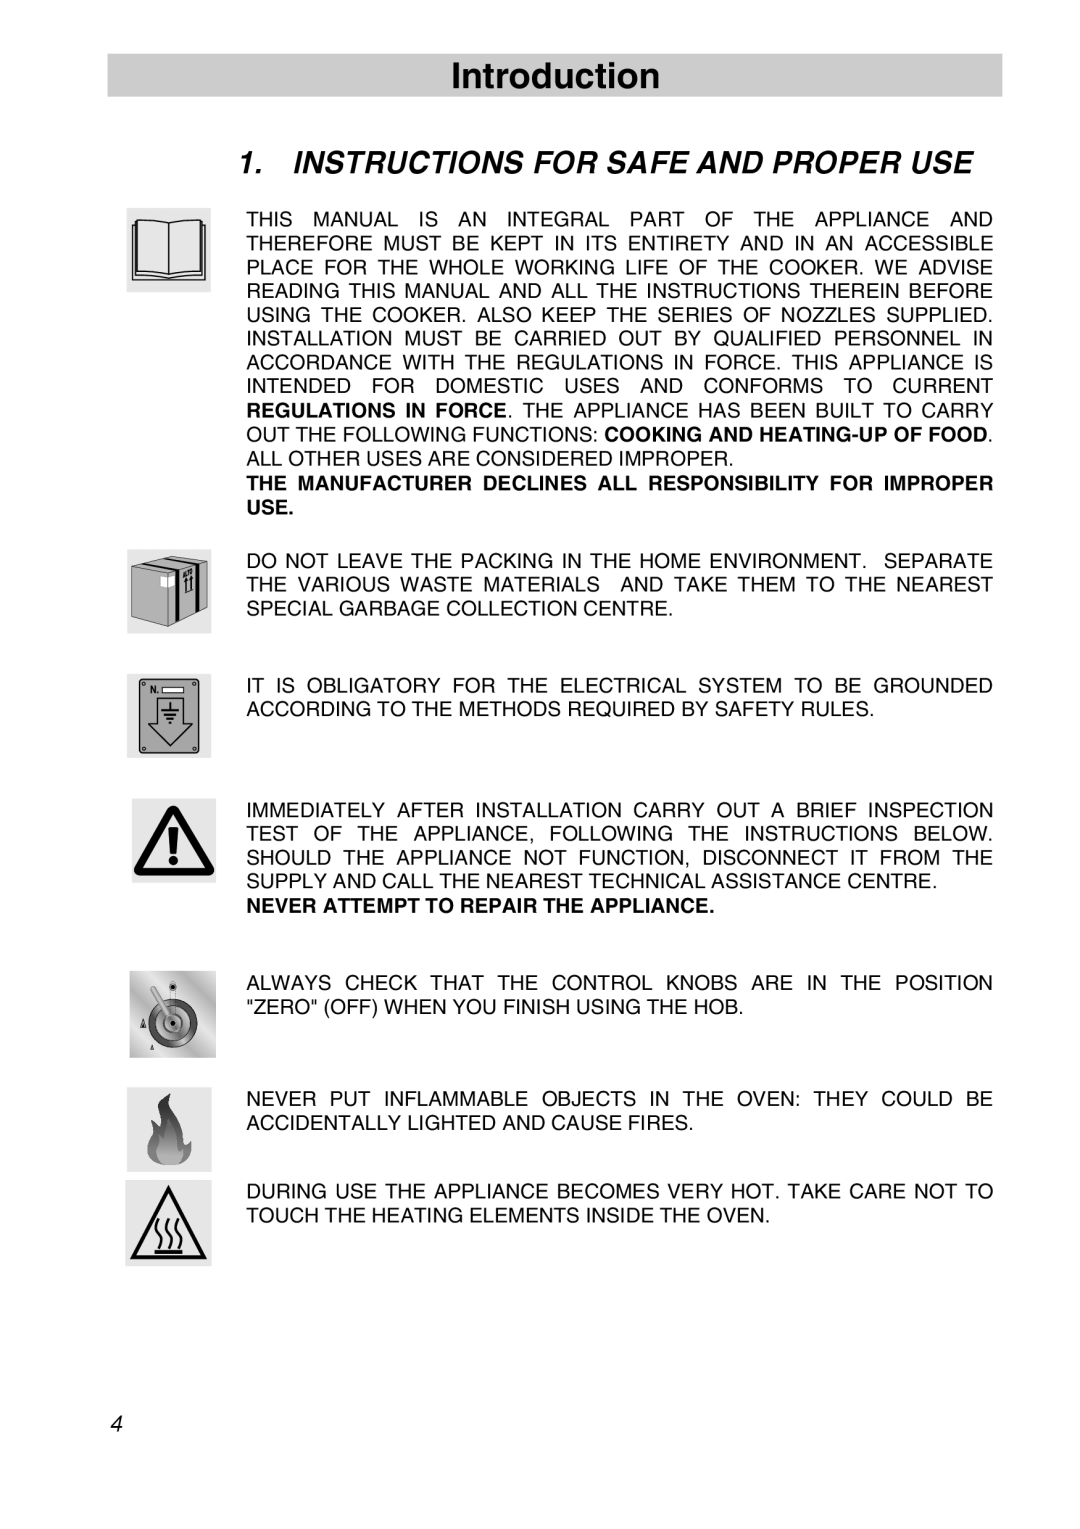 Smeg A11A-6 manual Introduction, Instructions For Safe And Proper Use, Never Attempt To Repair The Appliance 